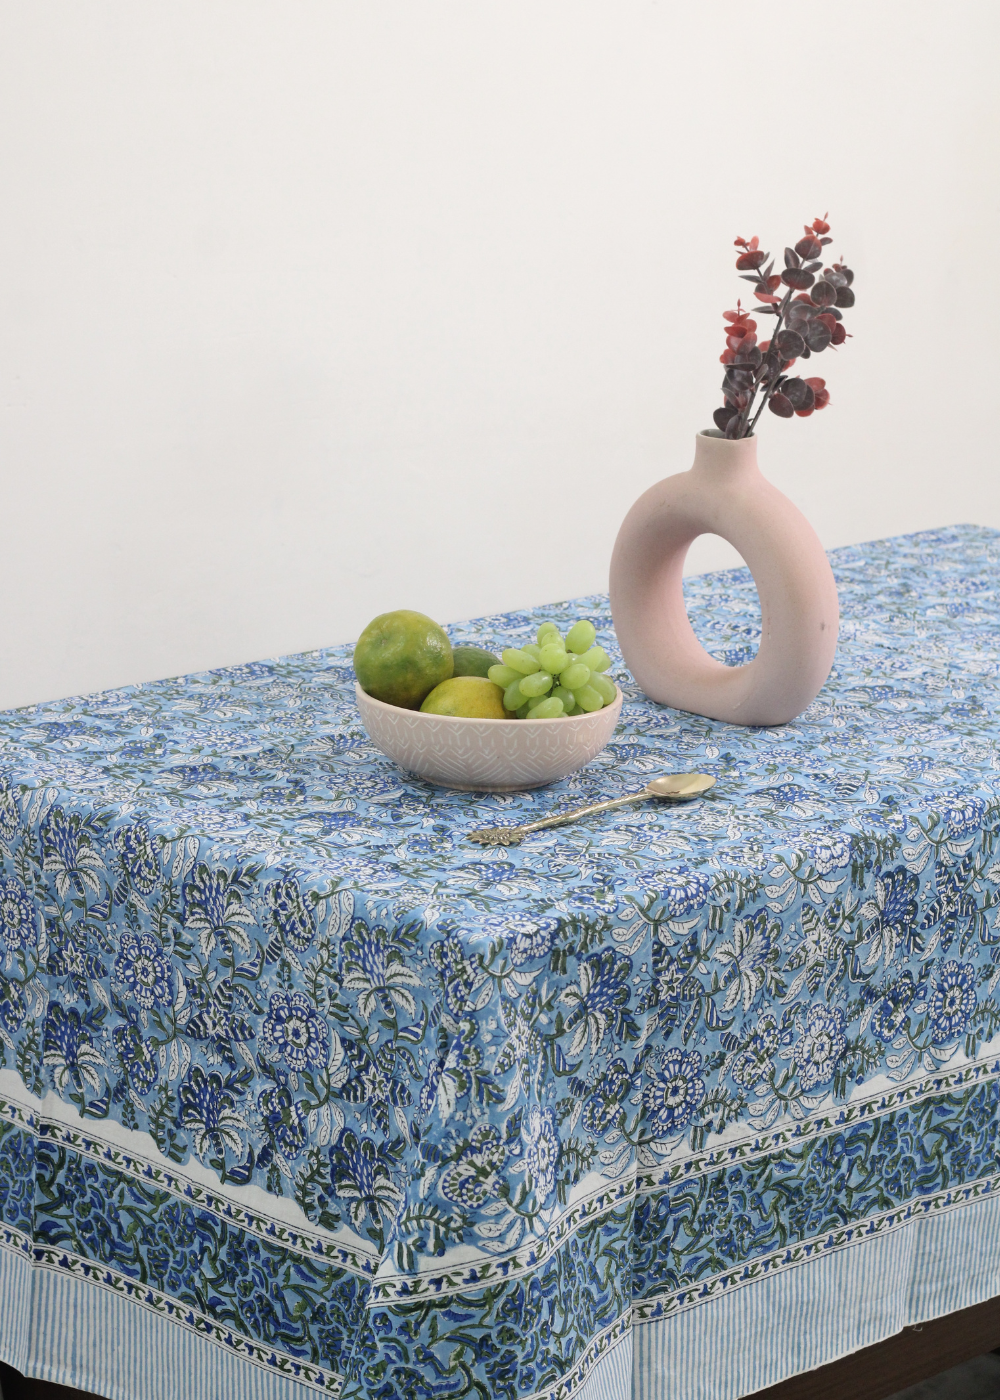 Blue floral table cloth with vase and fruits